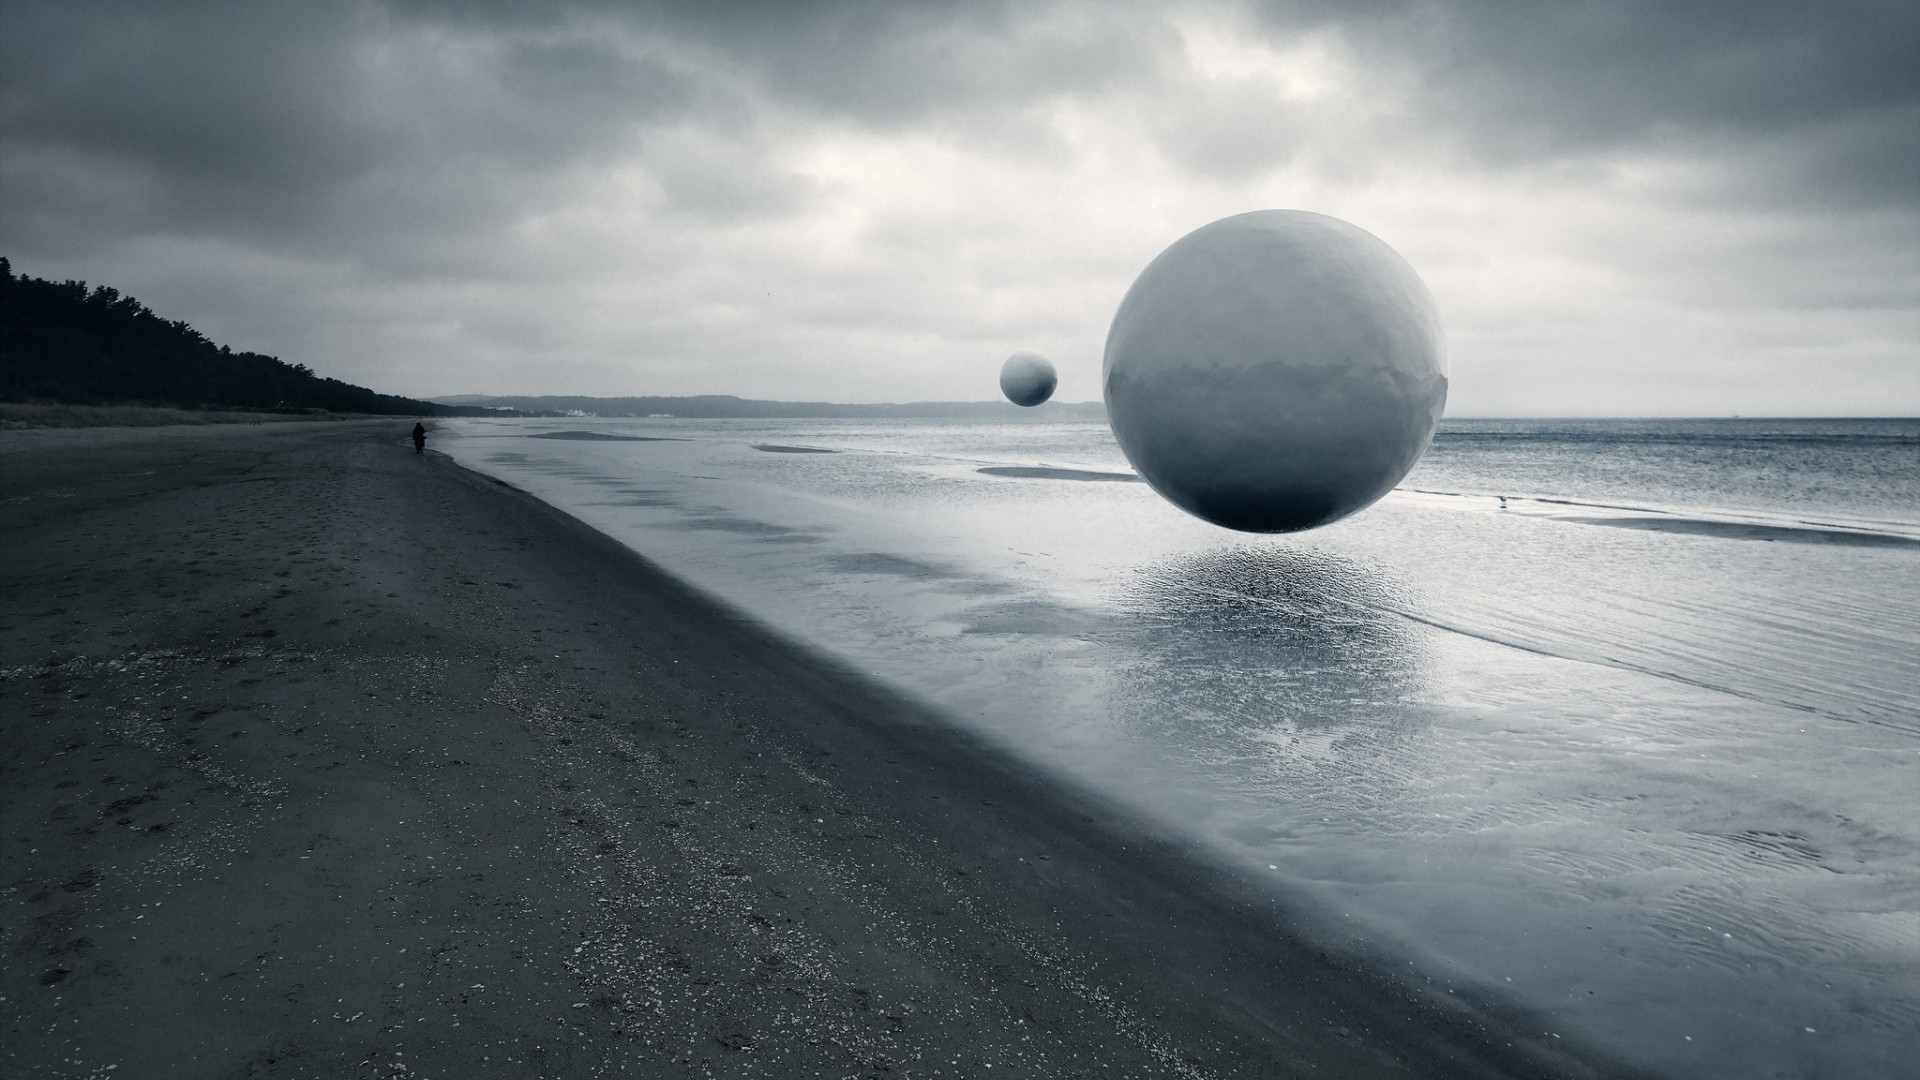 nature, Landscape, Water, Sea, Coast, Artwork, Ball, Sand, Beach, People, Alone, Trees, Forest, Monochrome, Clouds, Photo Manipulation, Sphere, Overcast Wallpaper